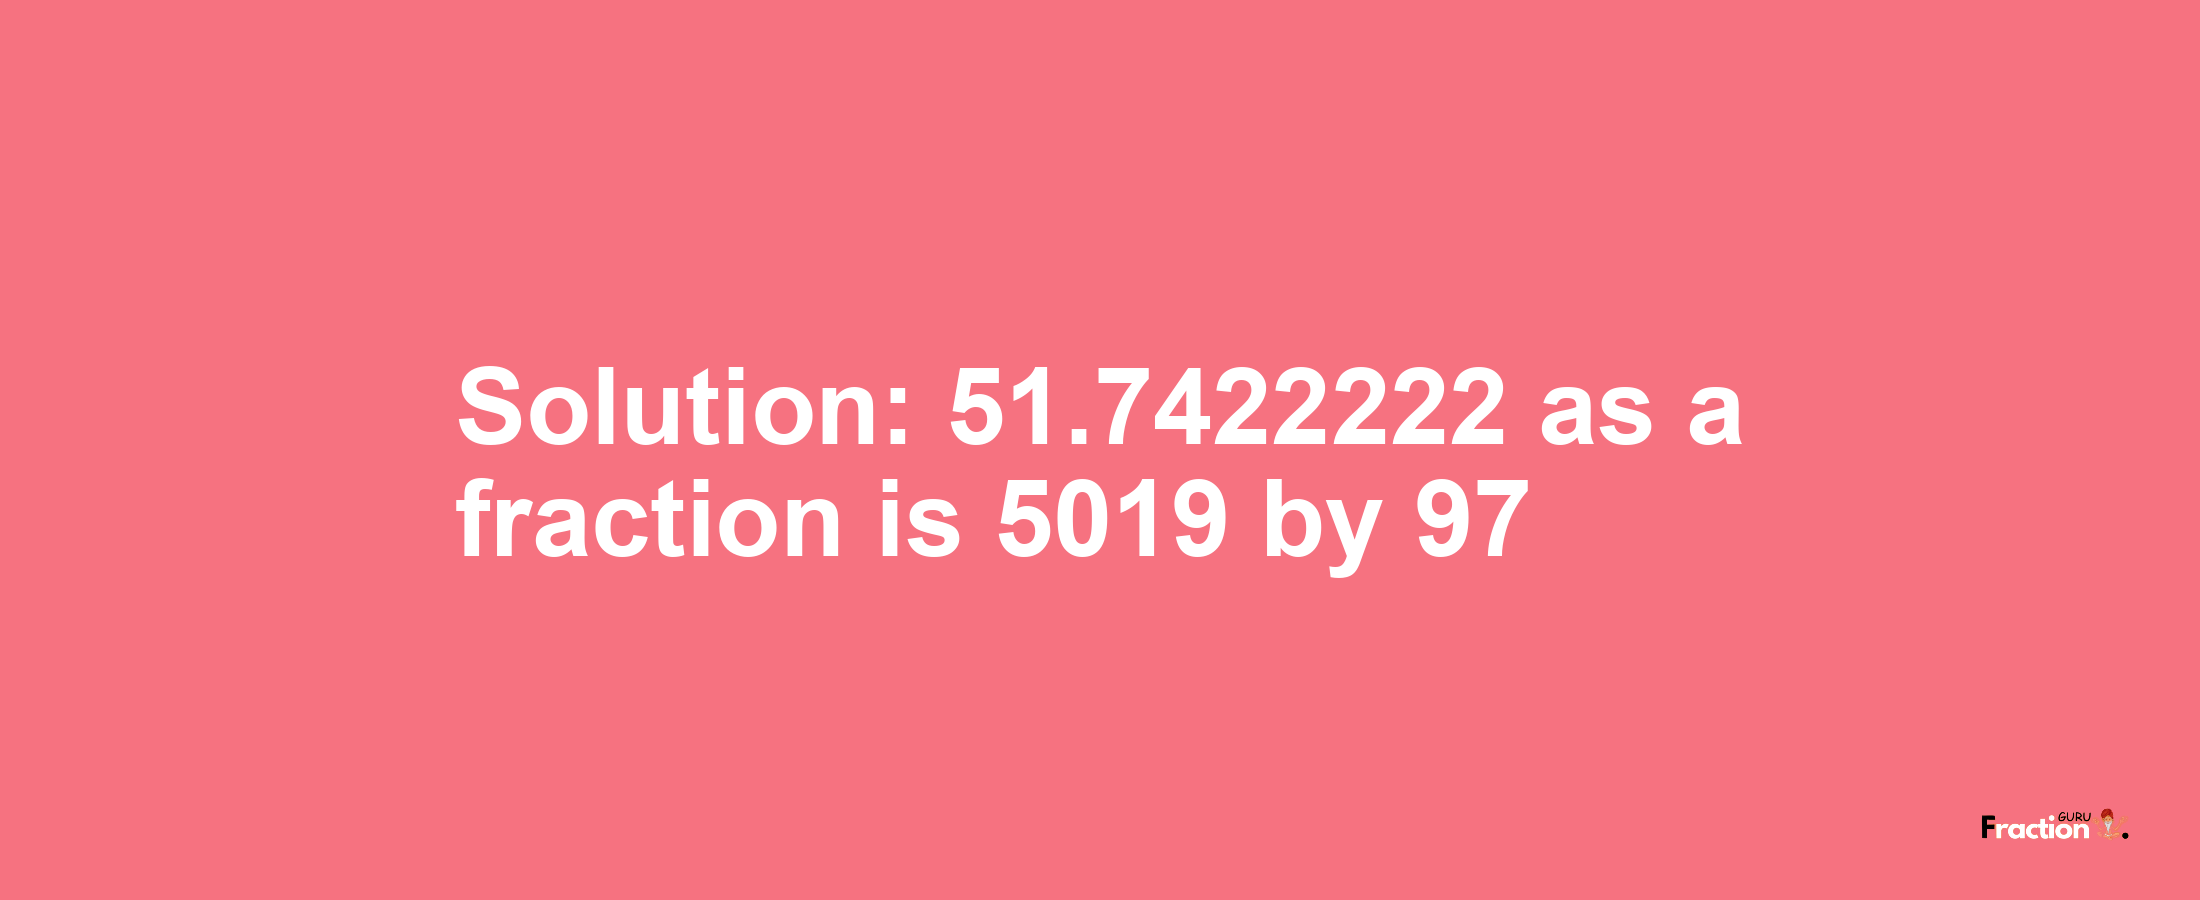 Solution:51.7422222 as a fraction is 5019/97